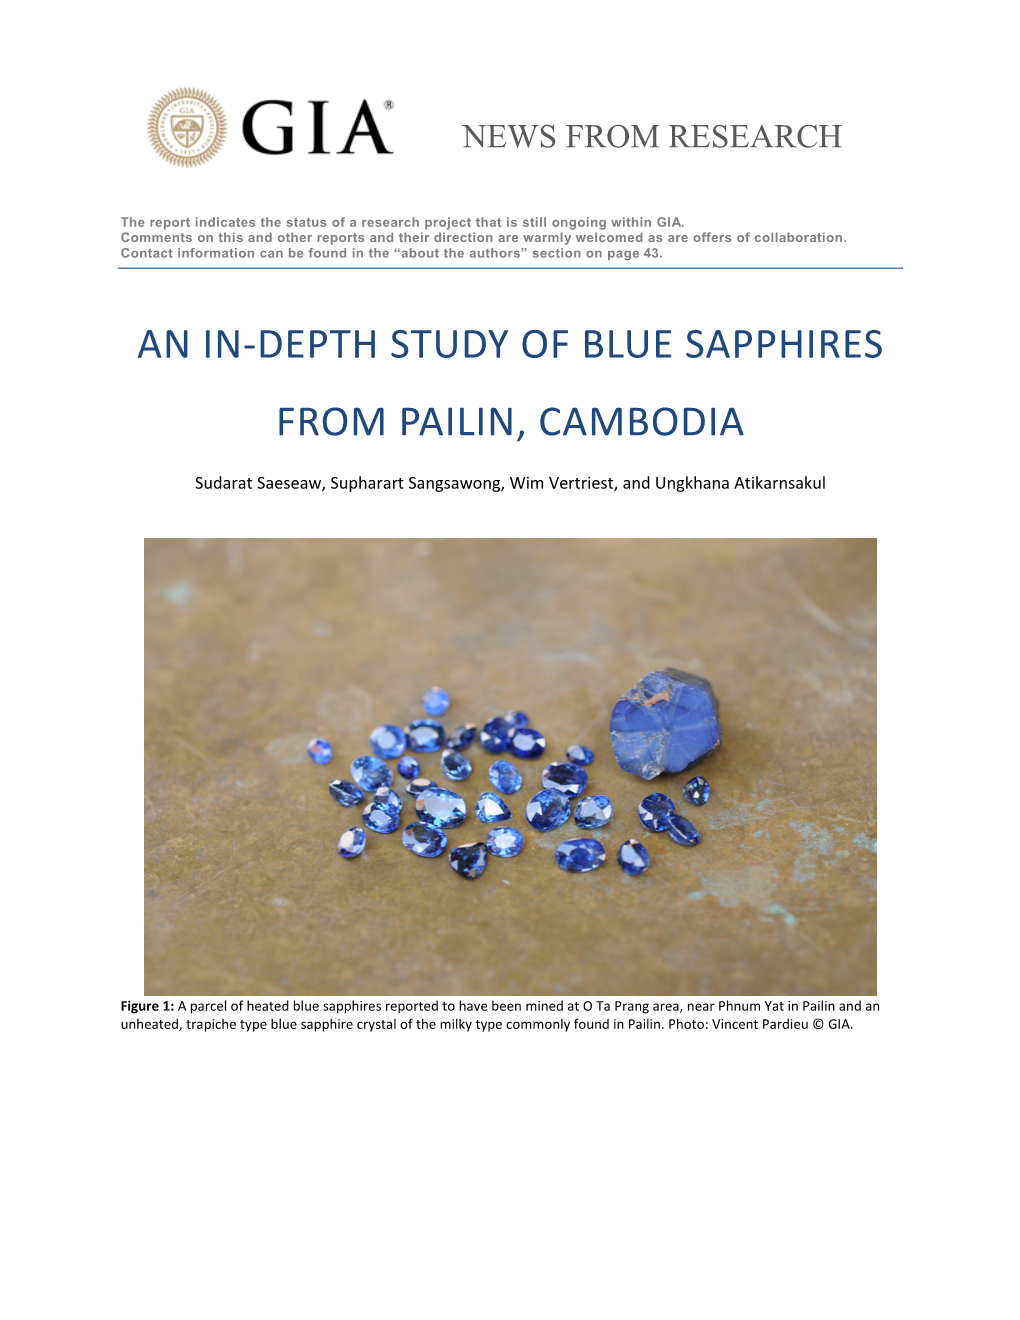 An In-Depth Study of Blue Sapphires from Pailin, Cambodia